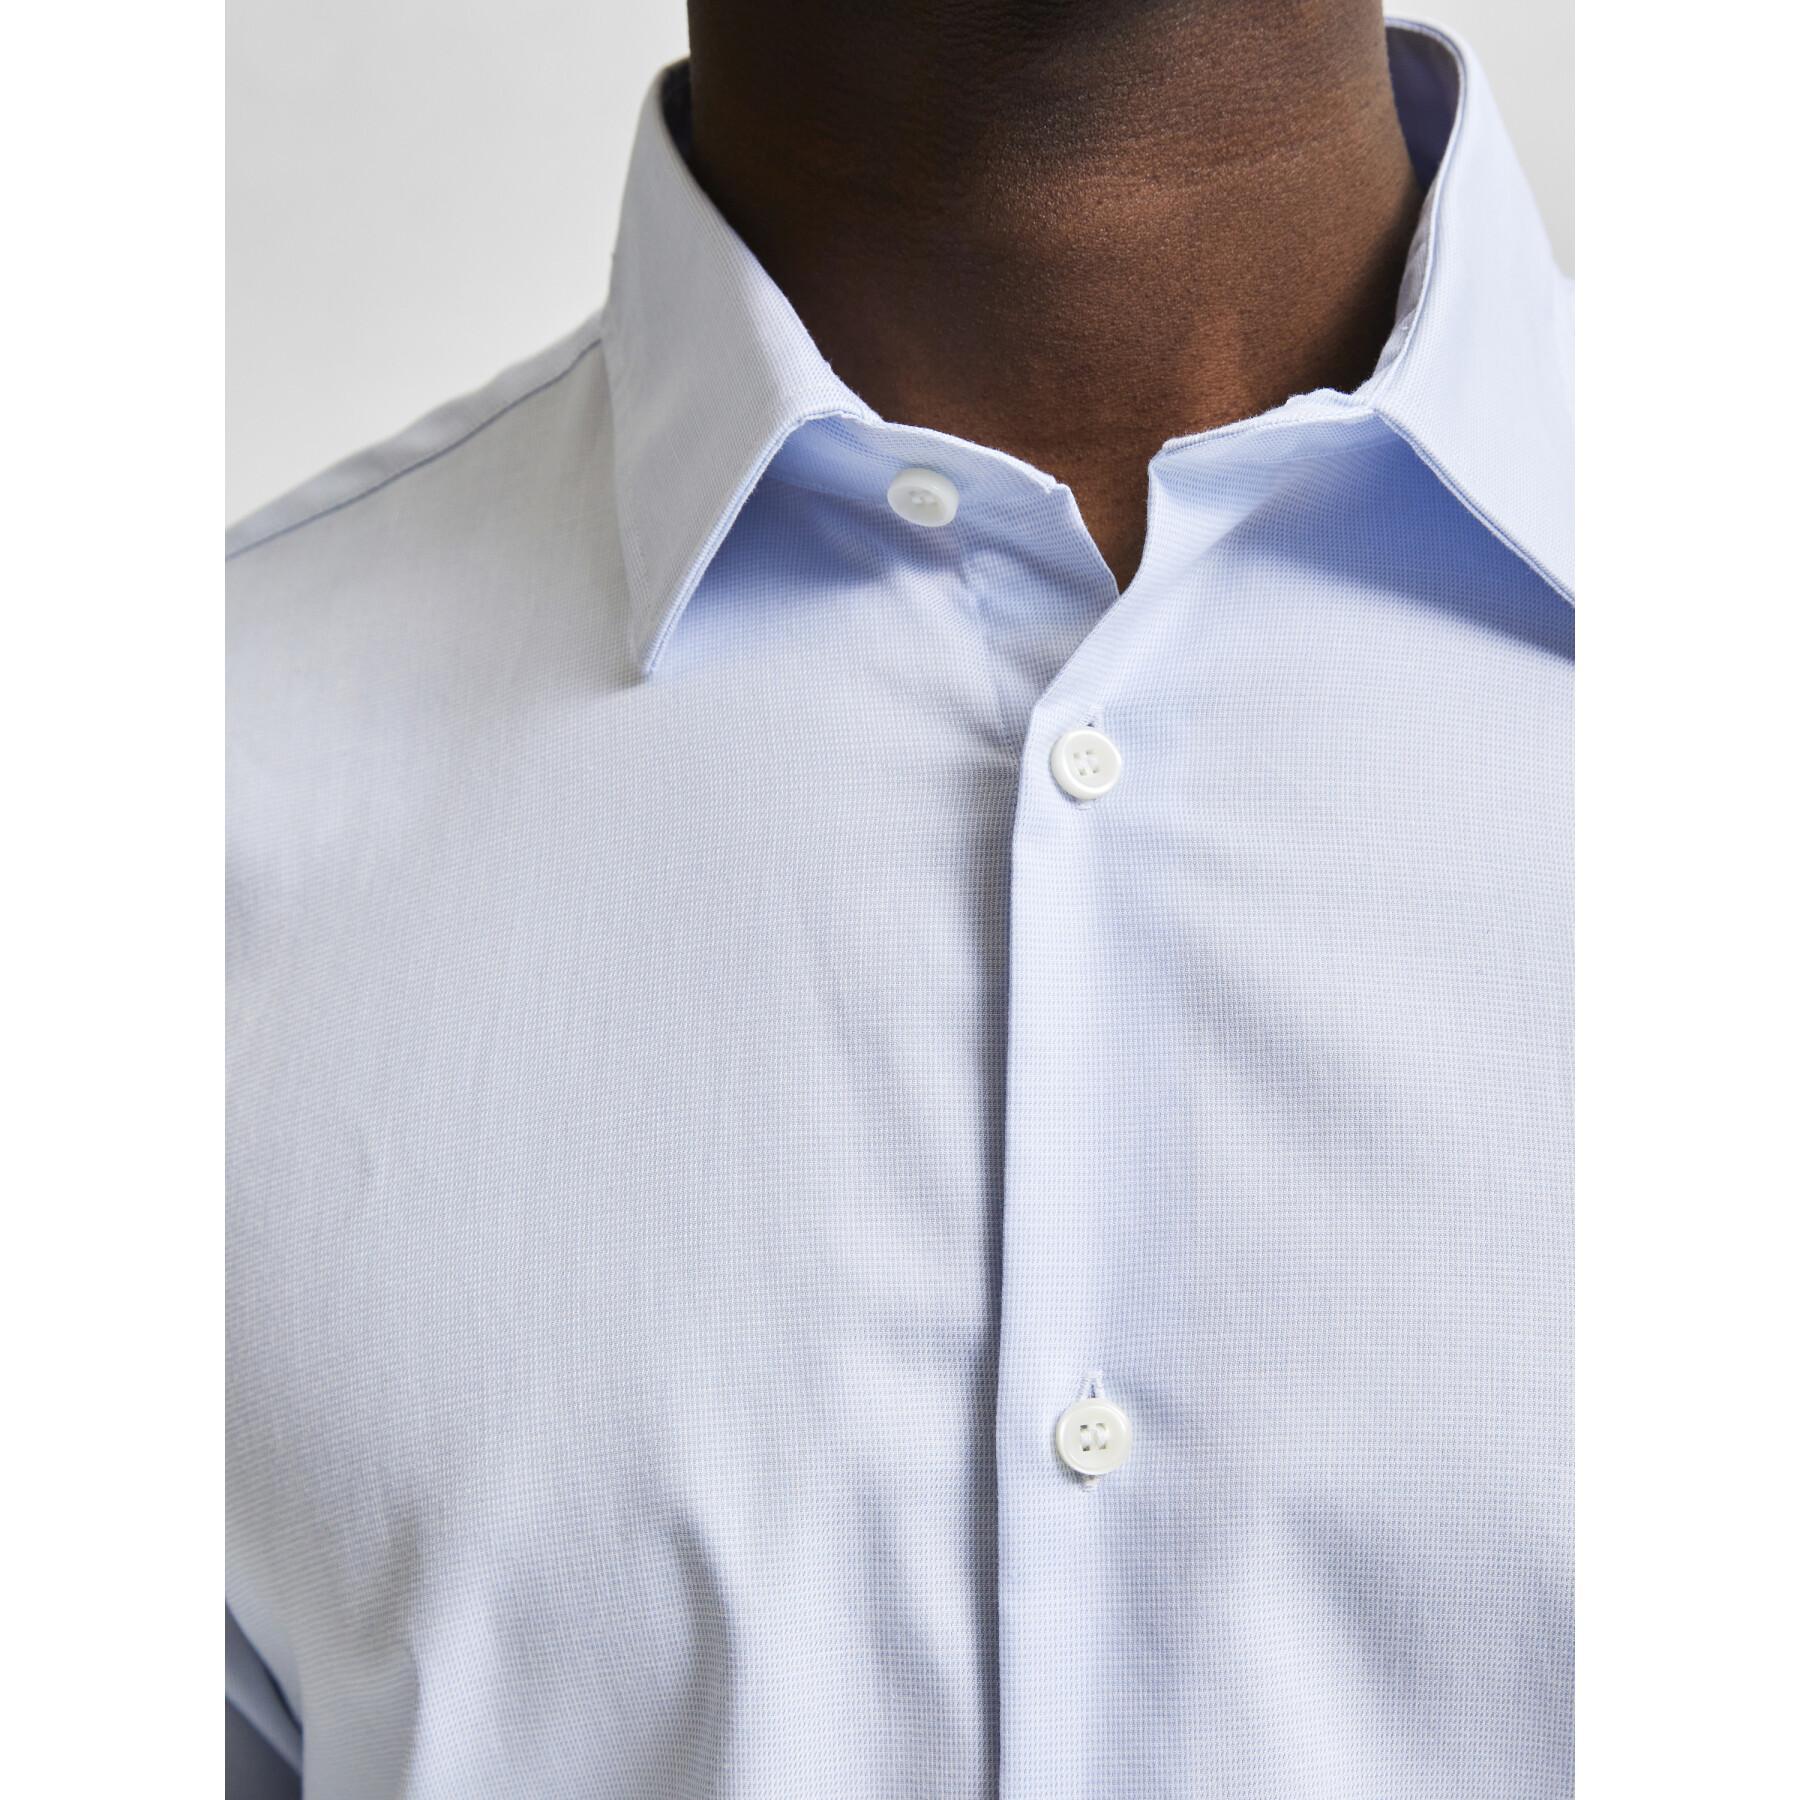 Camicia Selected Ethan manches longues slim classic